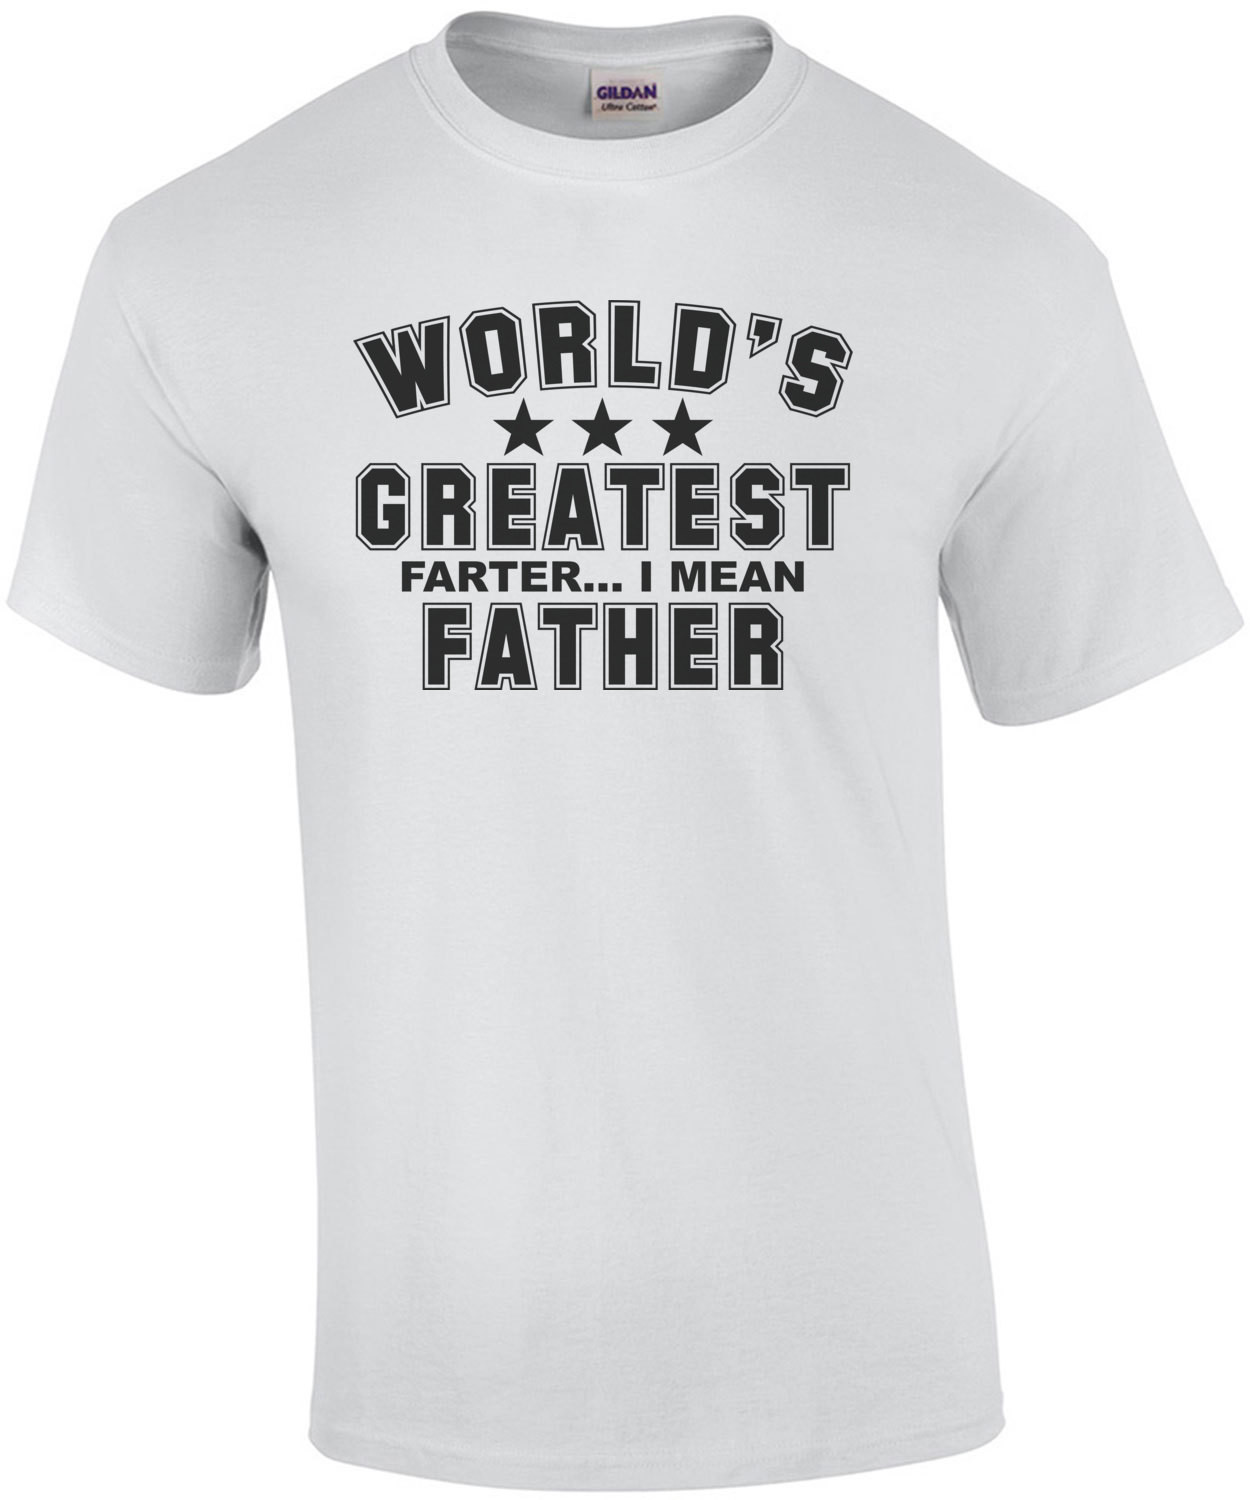 WORLD'S GREATEST FARTER... I MEAN FATHER T-Shirt